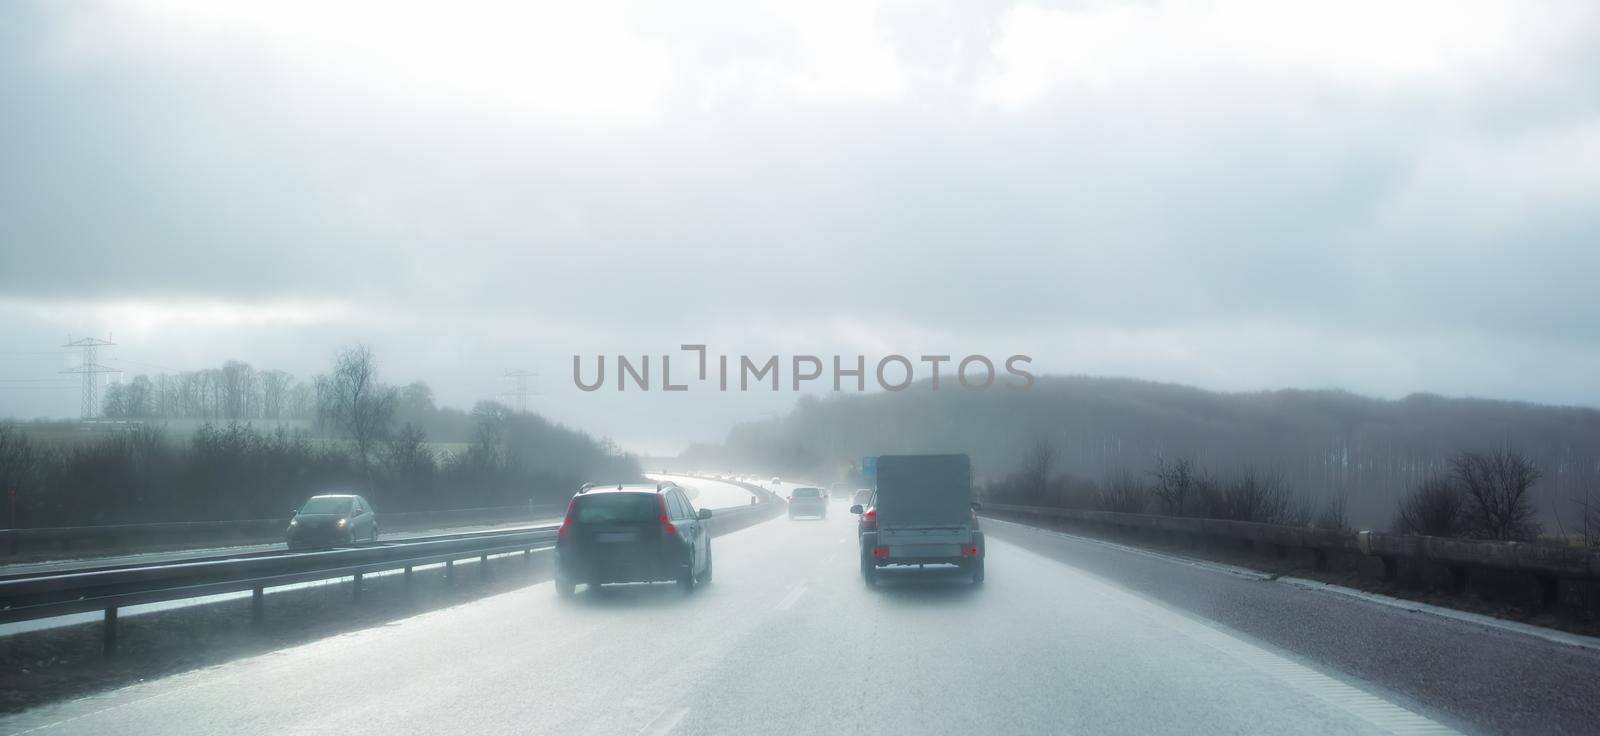 Cars at breaking distance on a highway on a rainy day in Denmark. Motor vehicles driving on a dangerous asphalt road on a cold misty winter day in a picturesque landscape. Safe driving in bad weather.